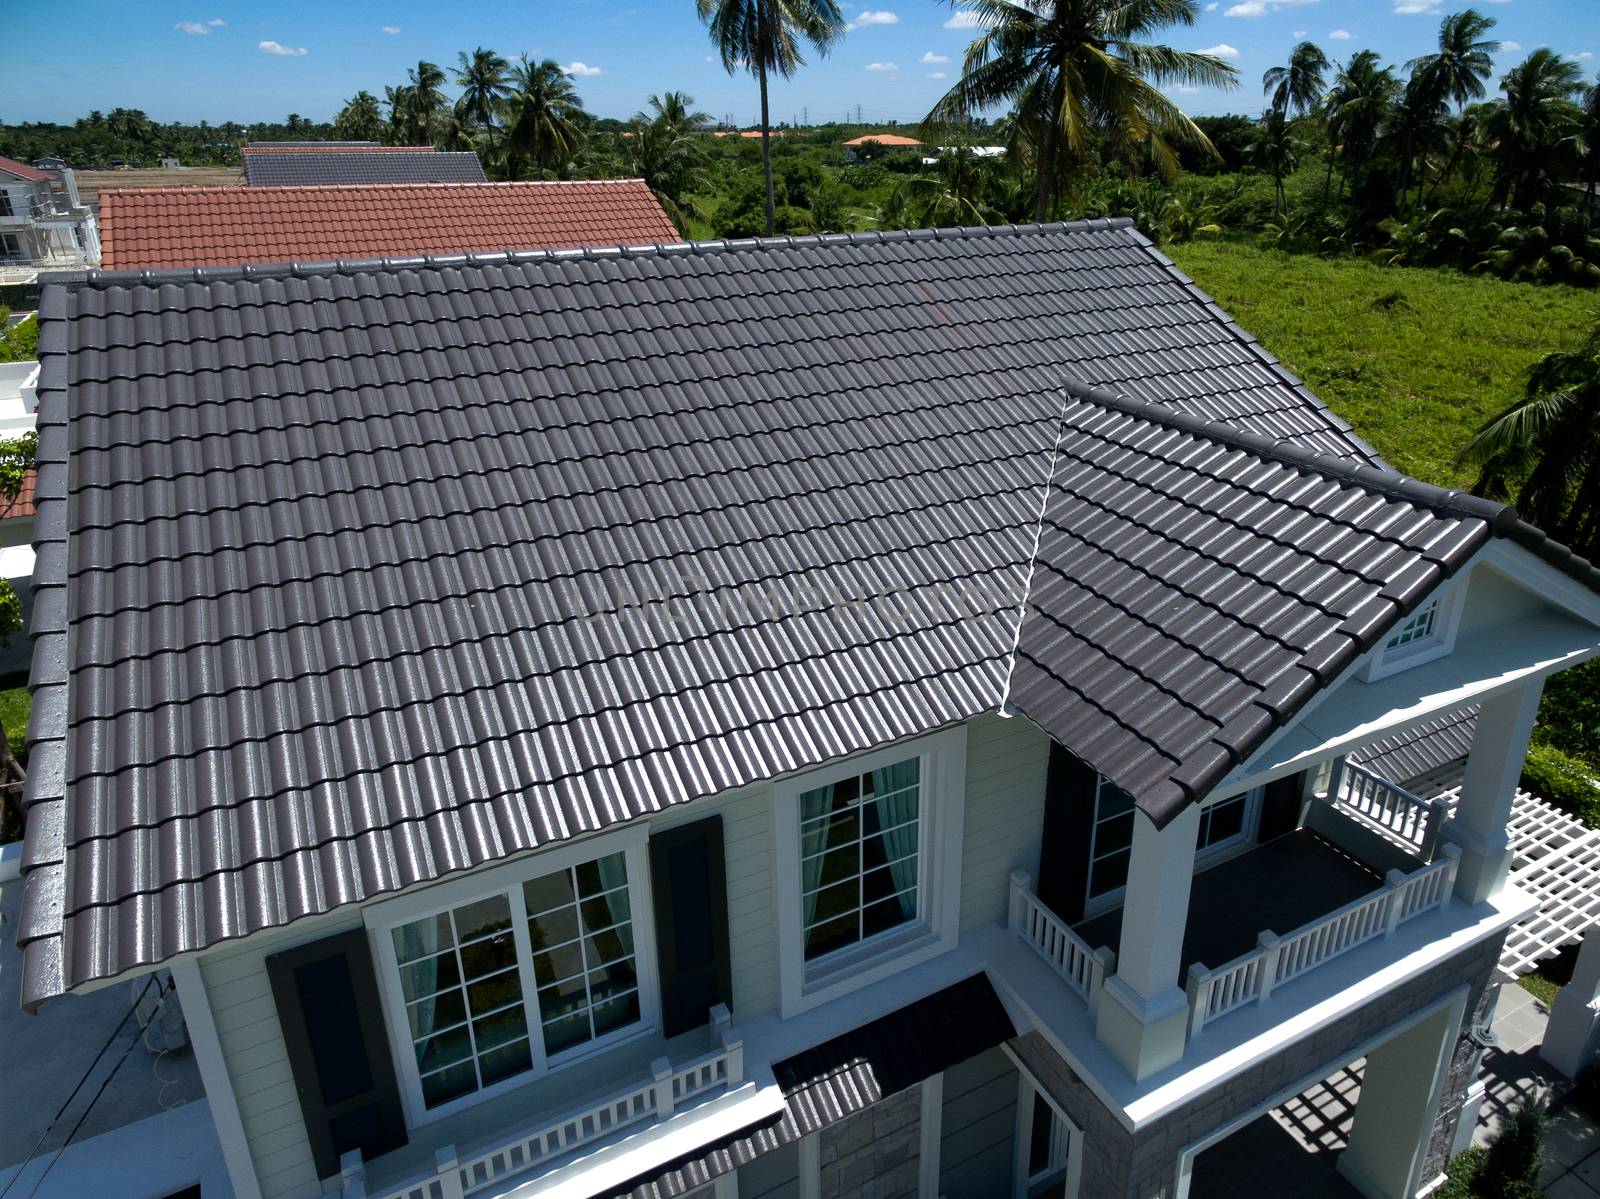 House New Roof Tiles by praethip